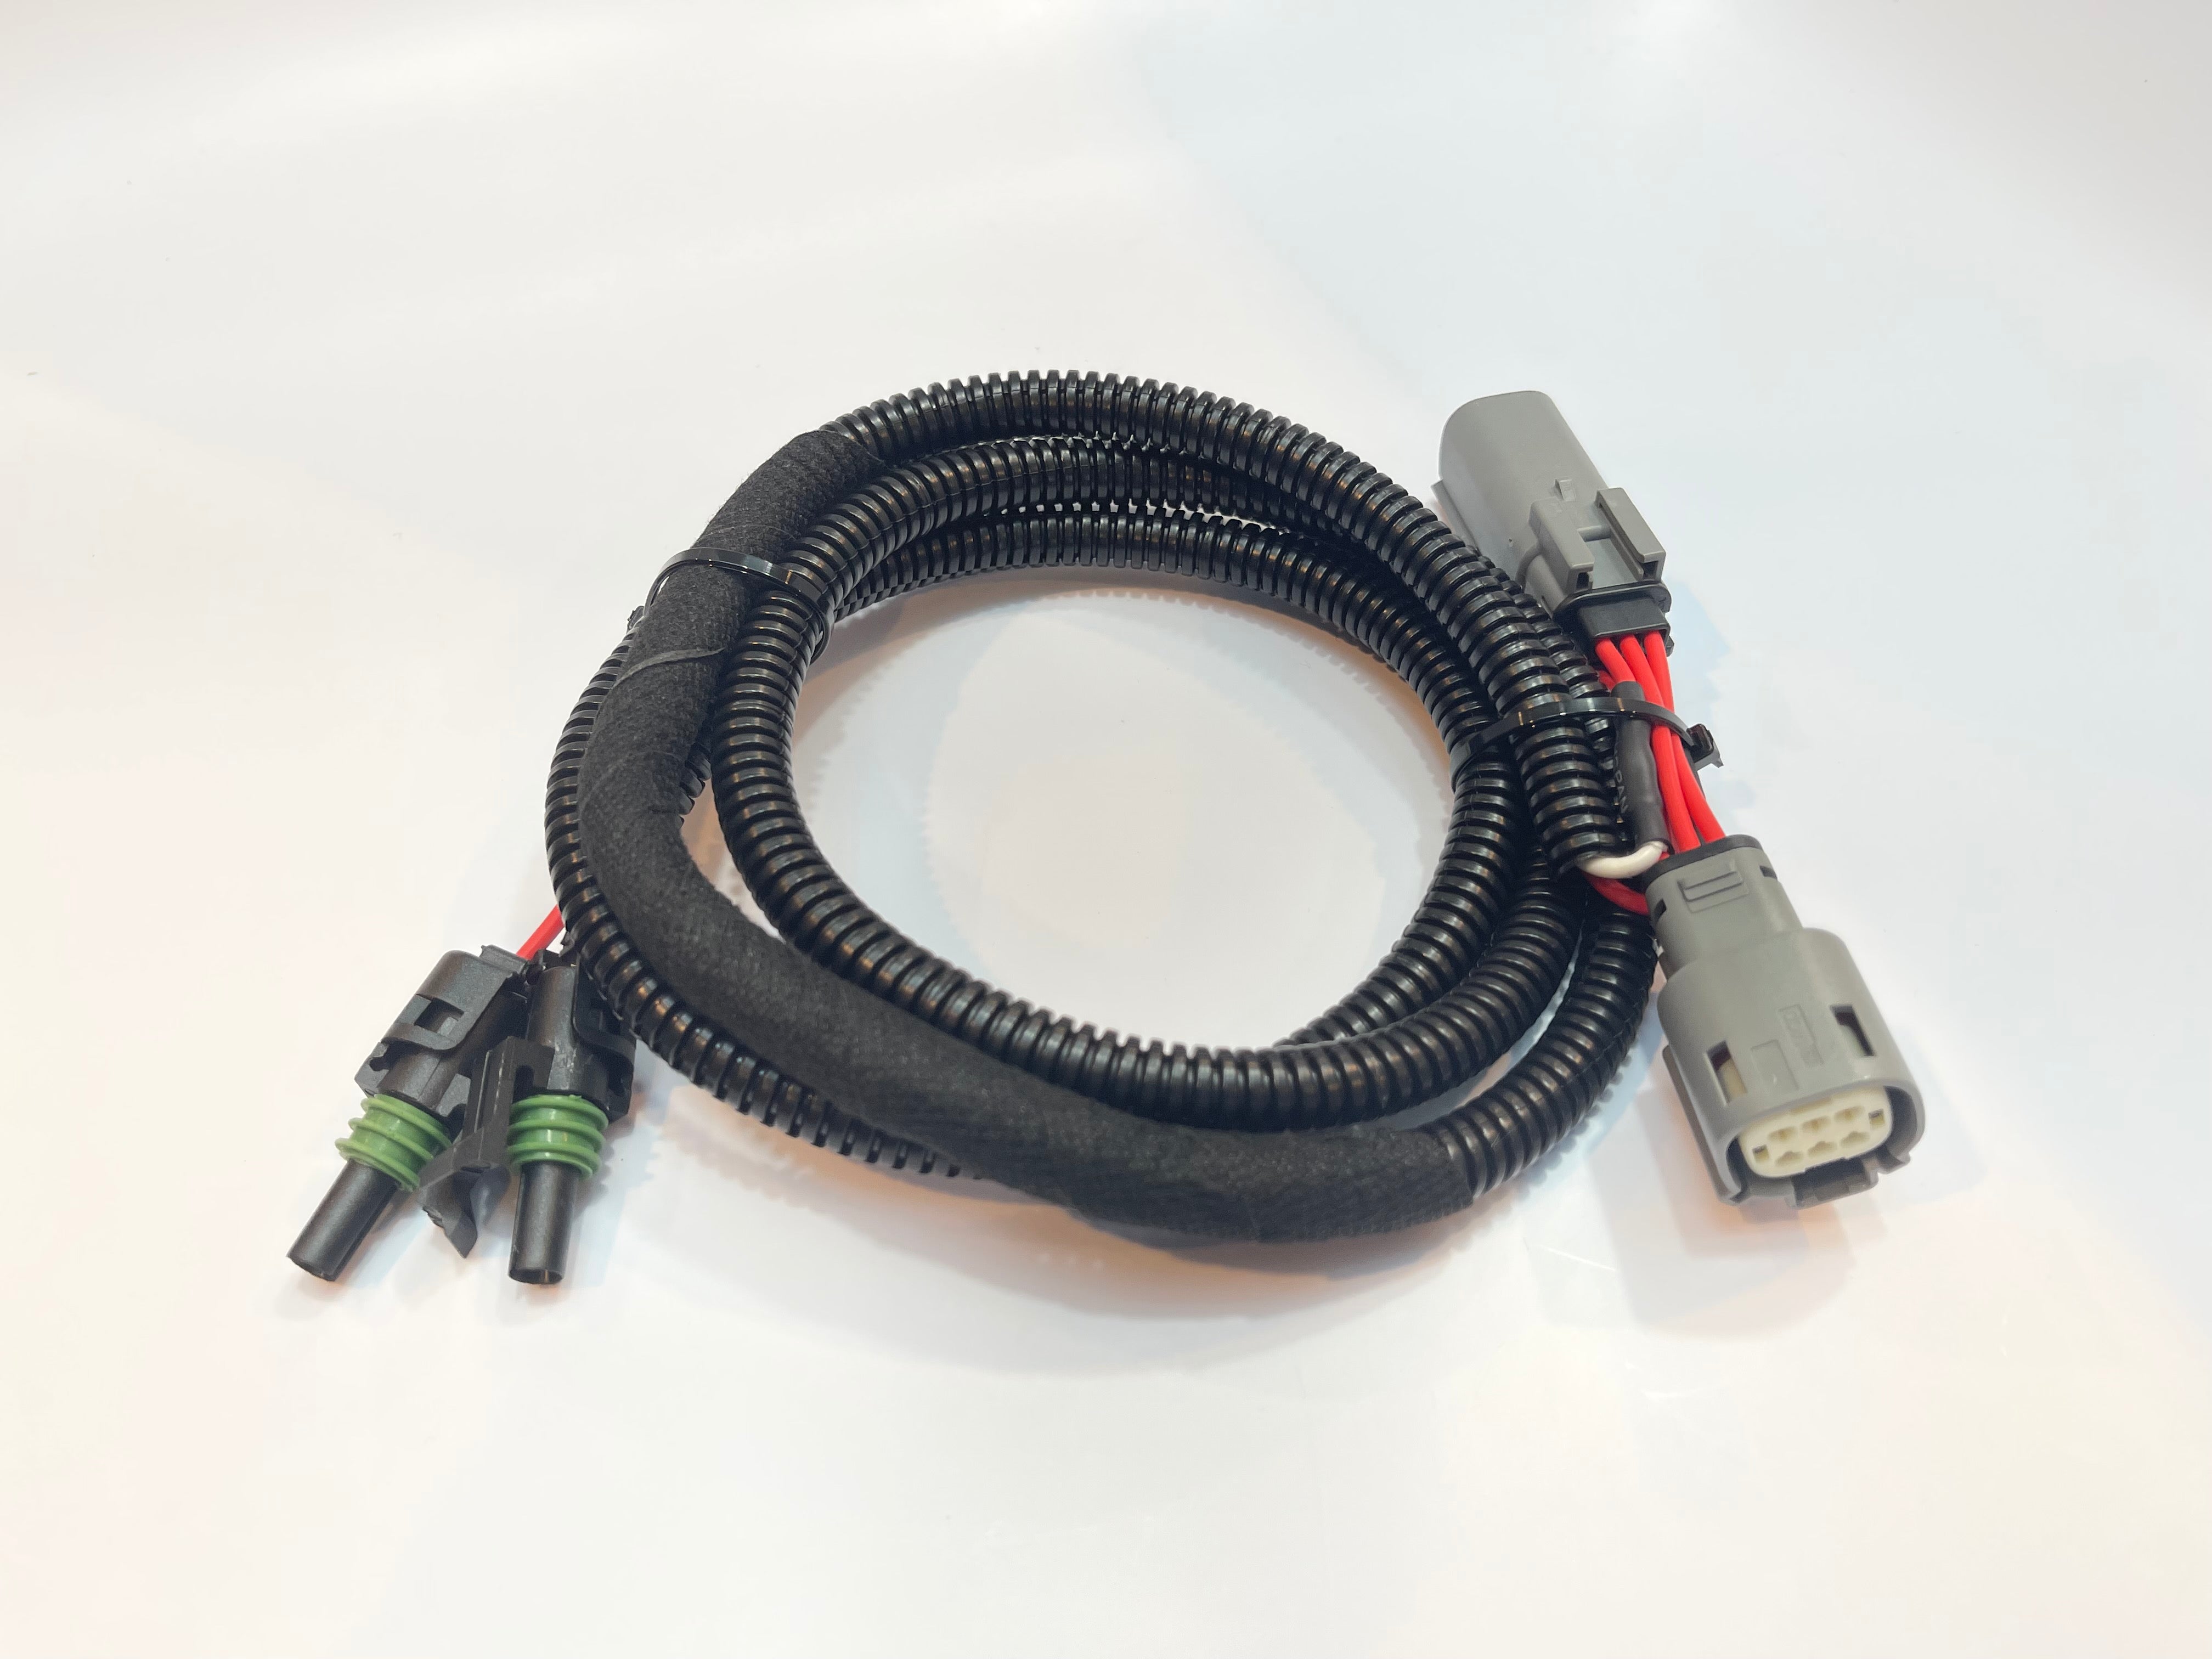 Harness Tail Light Connector Adapter (Powers Reverse Lights/backlights) - SPV Harness System (Works with Many Vehicles, See Details)